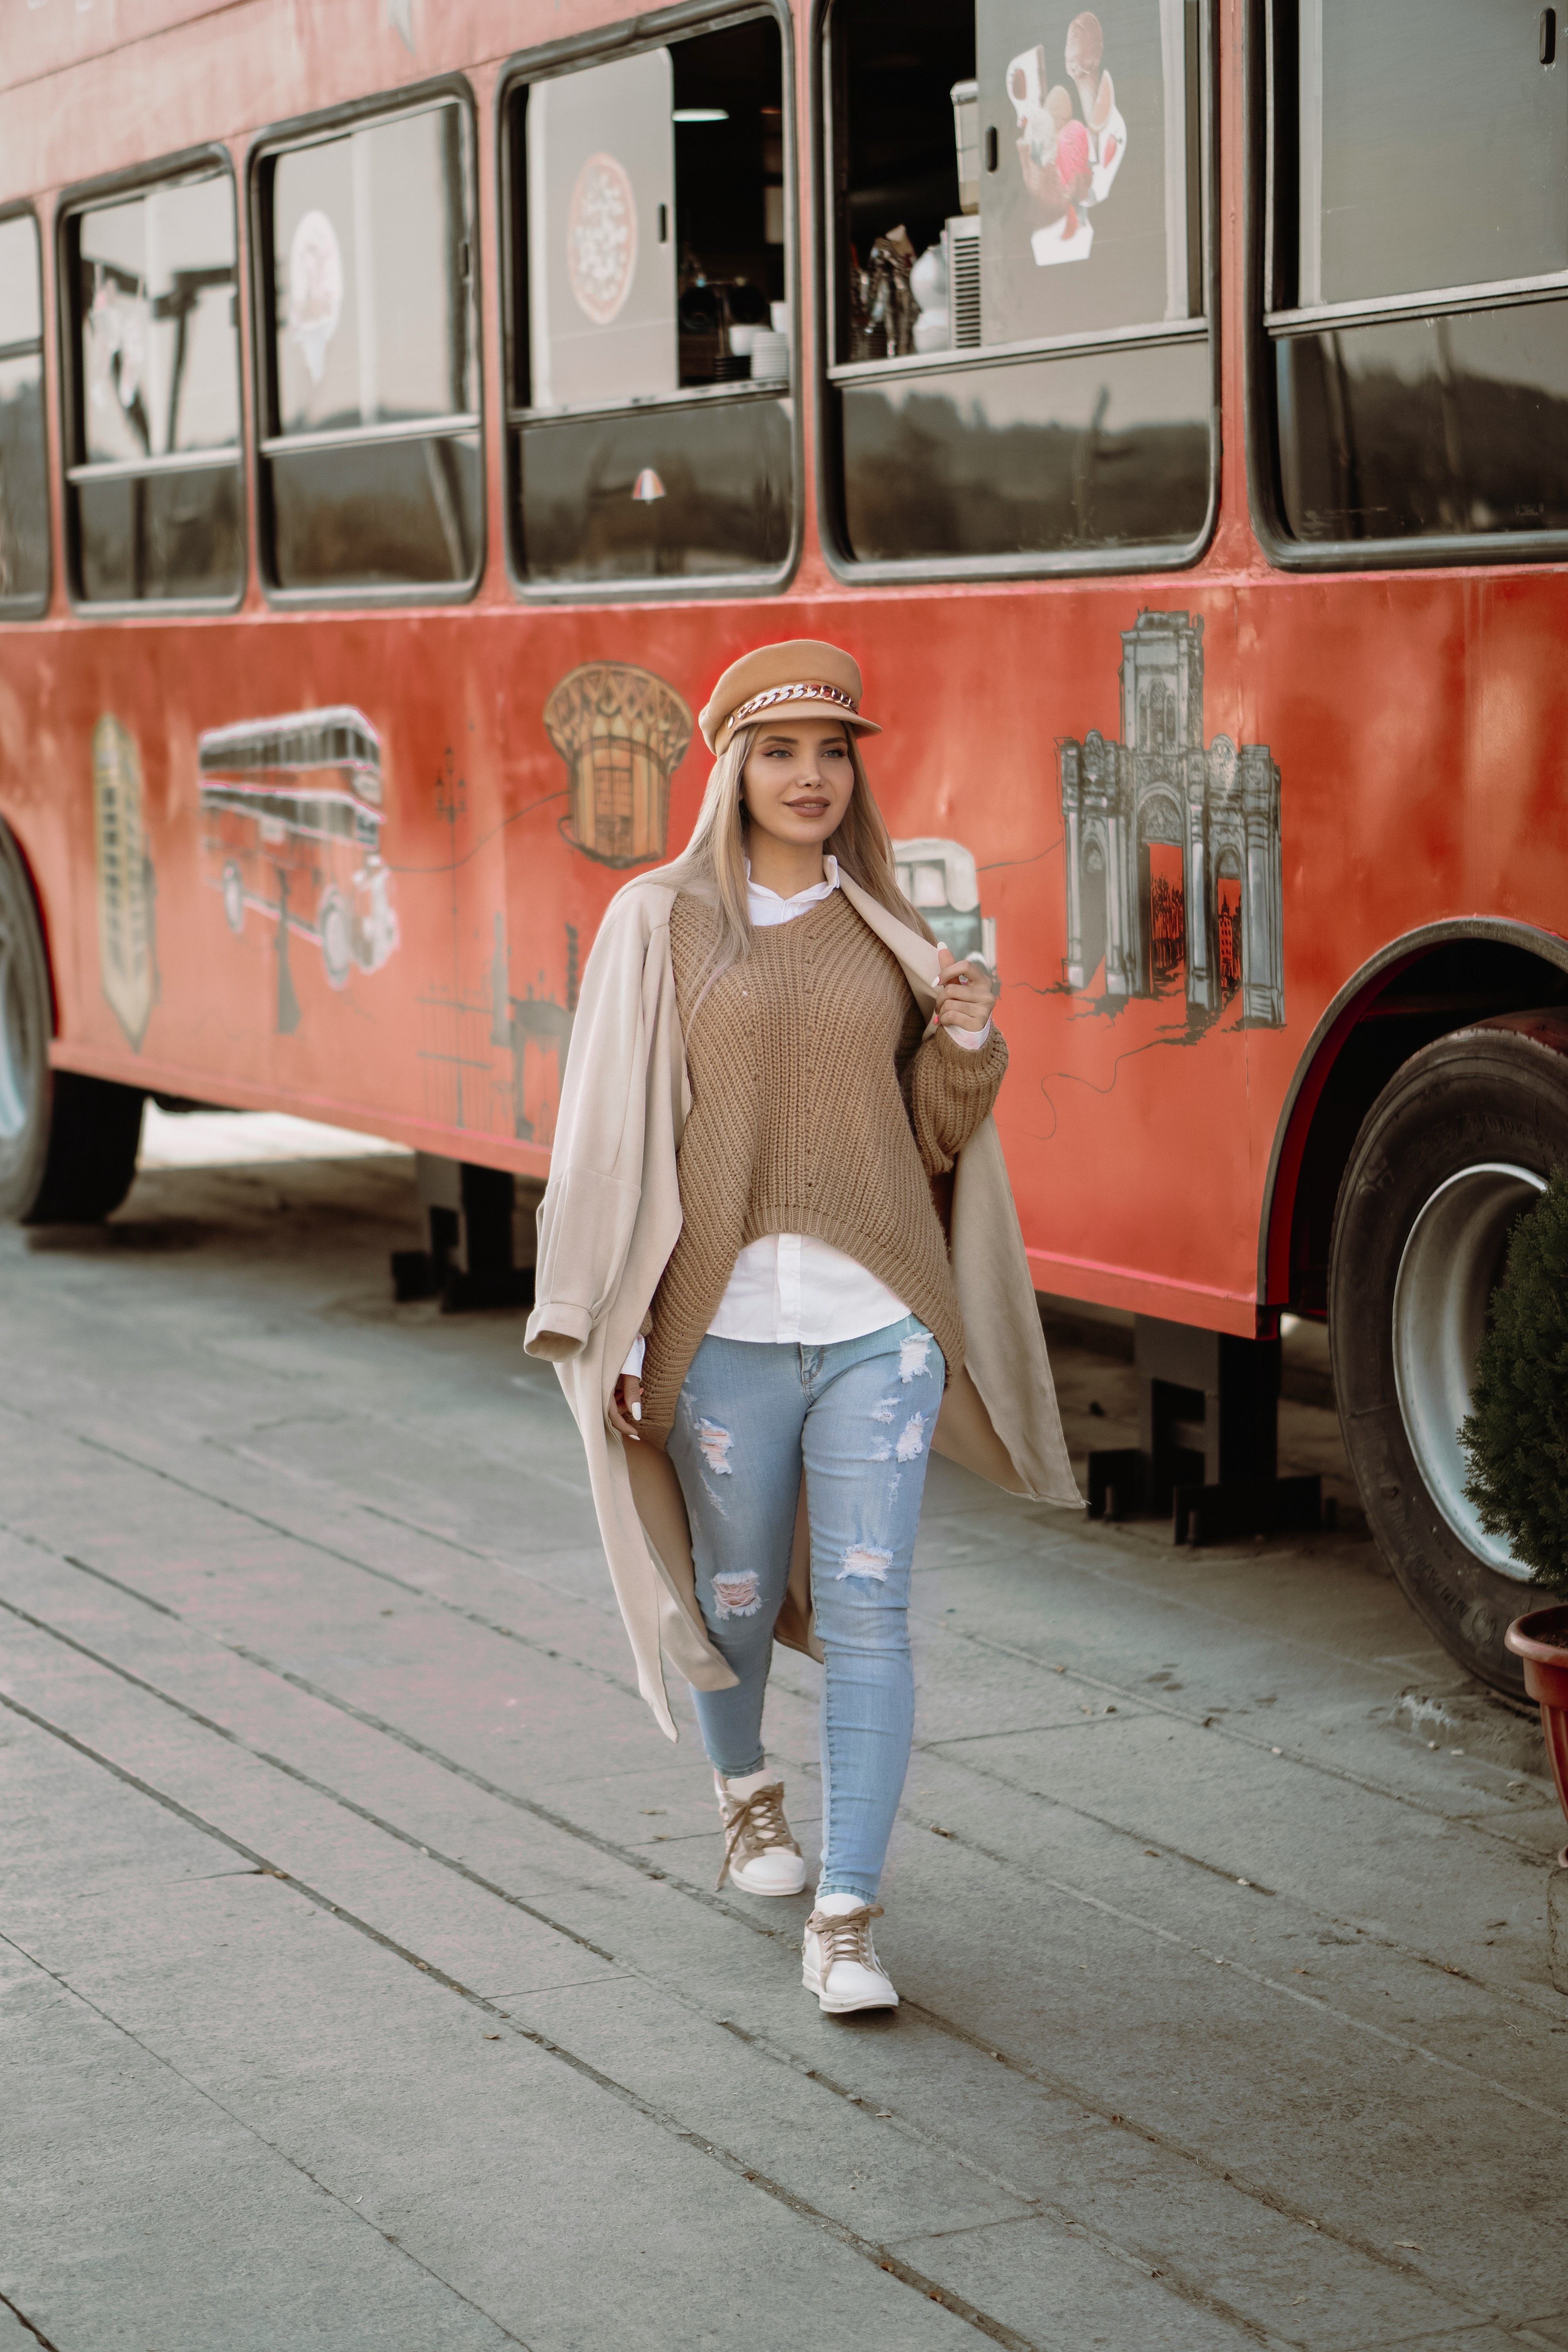 woman in white knit sweater and blue denim jeans standing beside red bus